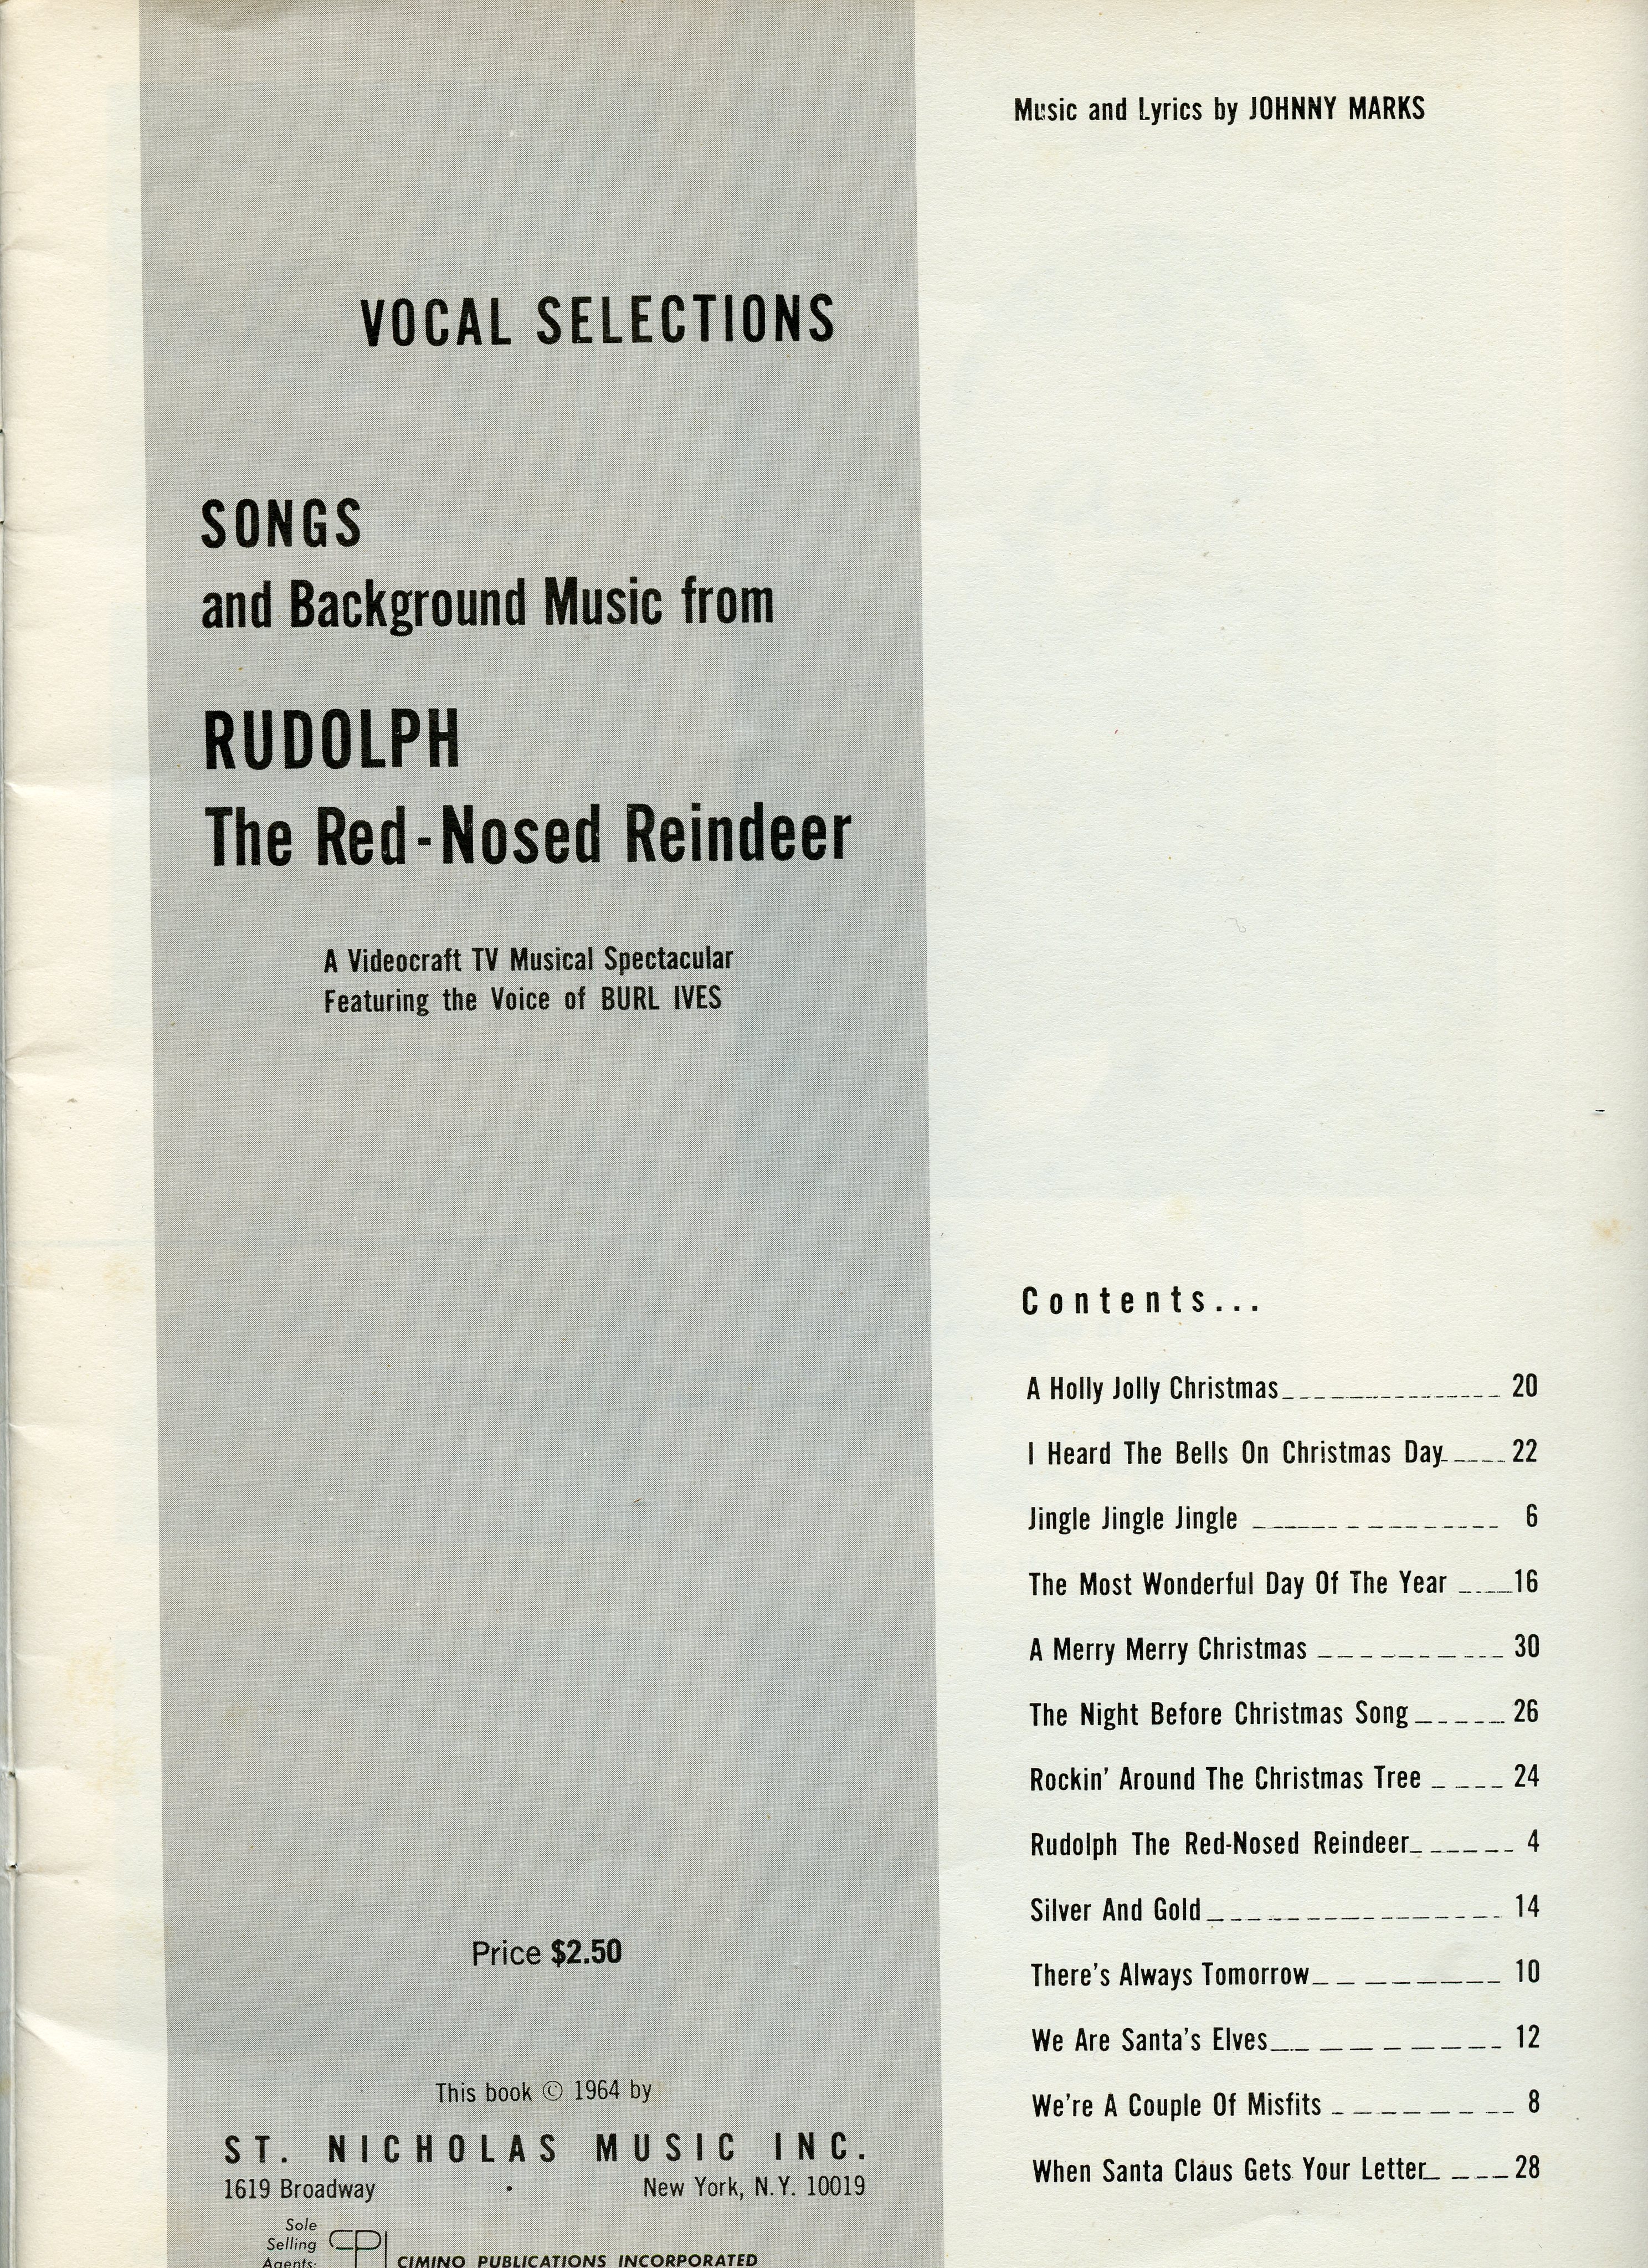 Table of contents for the songbook, Songs and Background Music from Rudolph the Red-Nosed Reindeer, by Johnny Marks. Songs include “A Holly Jolly Christmas,” “Jingle Jingle Jingle,” “Silver and Gold,” “There’s Always Tomorrow,” “We’re a Couple of Misfits,” “We Are Santa’s Elves,” “The Most Wonderful Day of the Year,” “Rudolph the Red-Nosed Reindeer,” “Rockin’ Around the Christmas Tree,” and “When Santa Claus Gets Your Letter”.